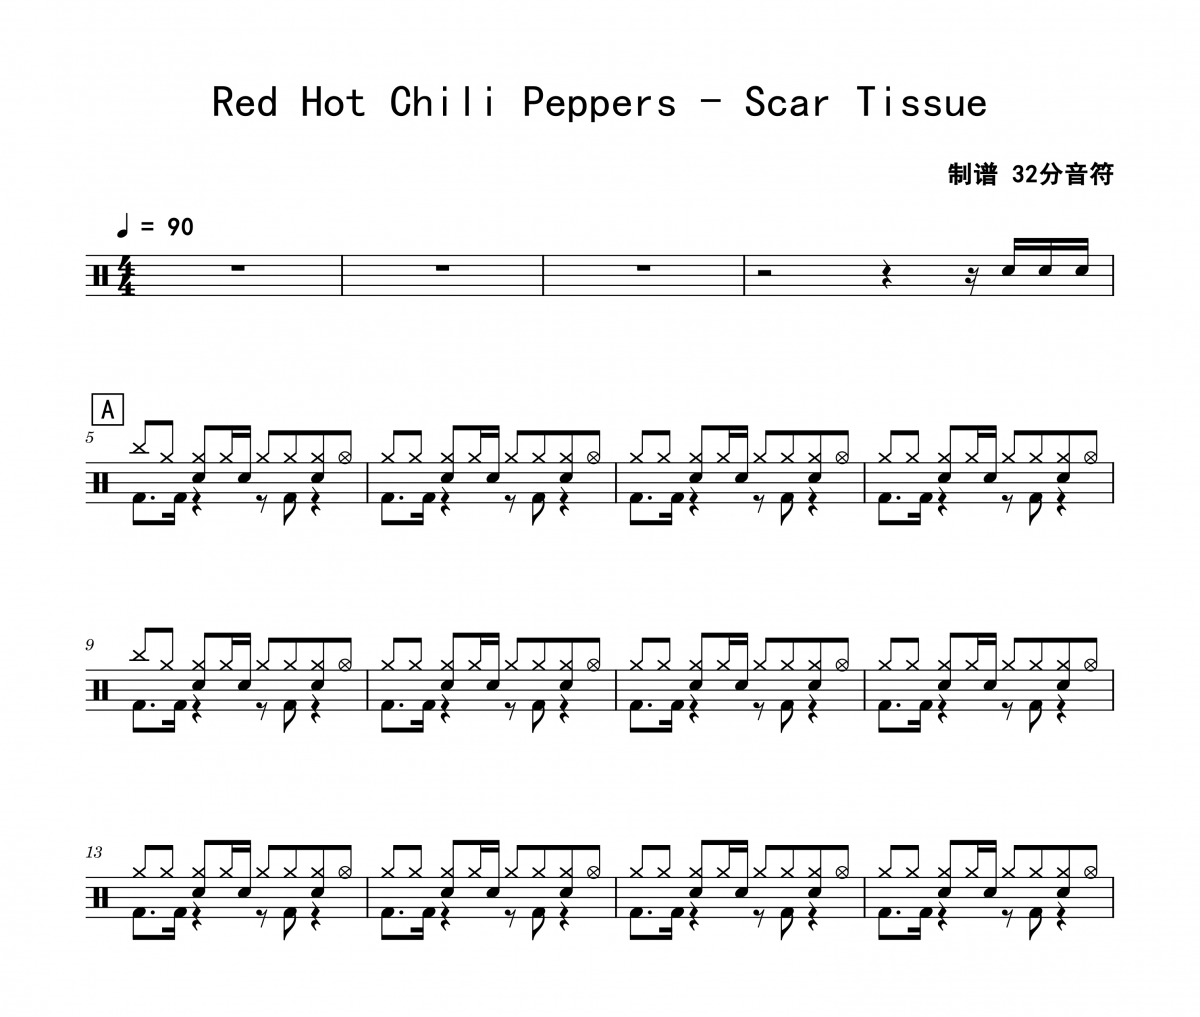 Red Hot Chili Peppers《Scar Tissue》架子鼓|爵士鼓|鼓谱